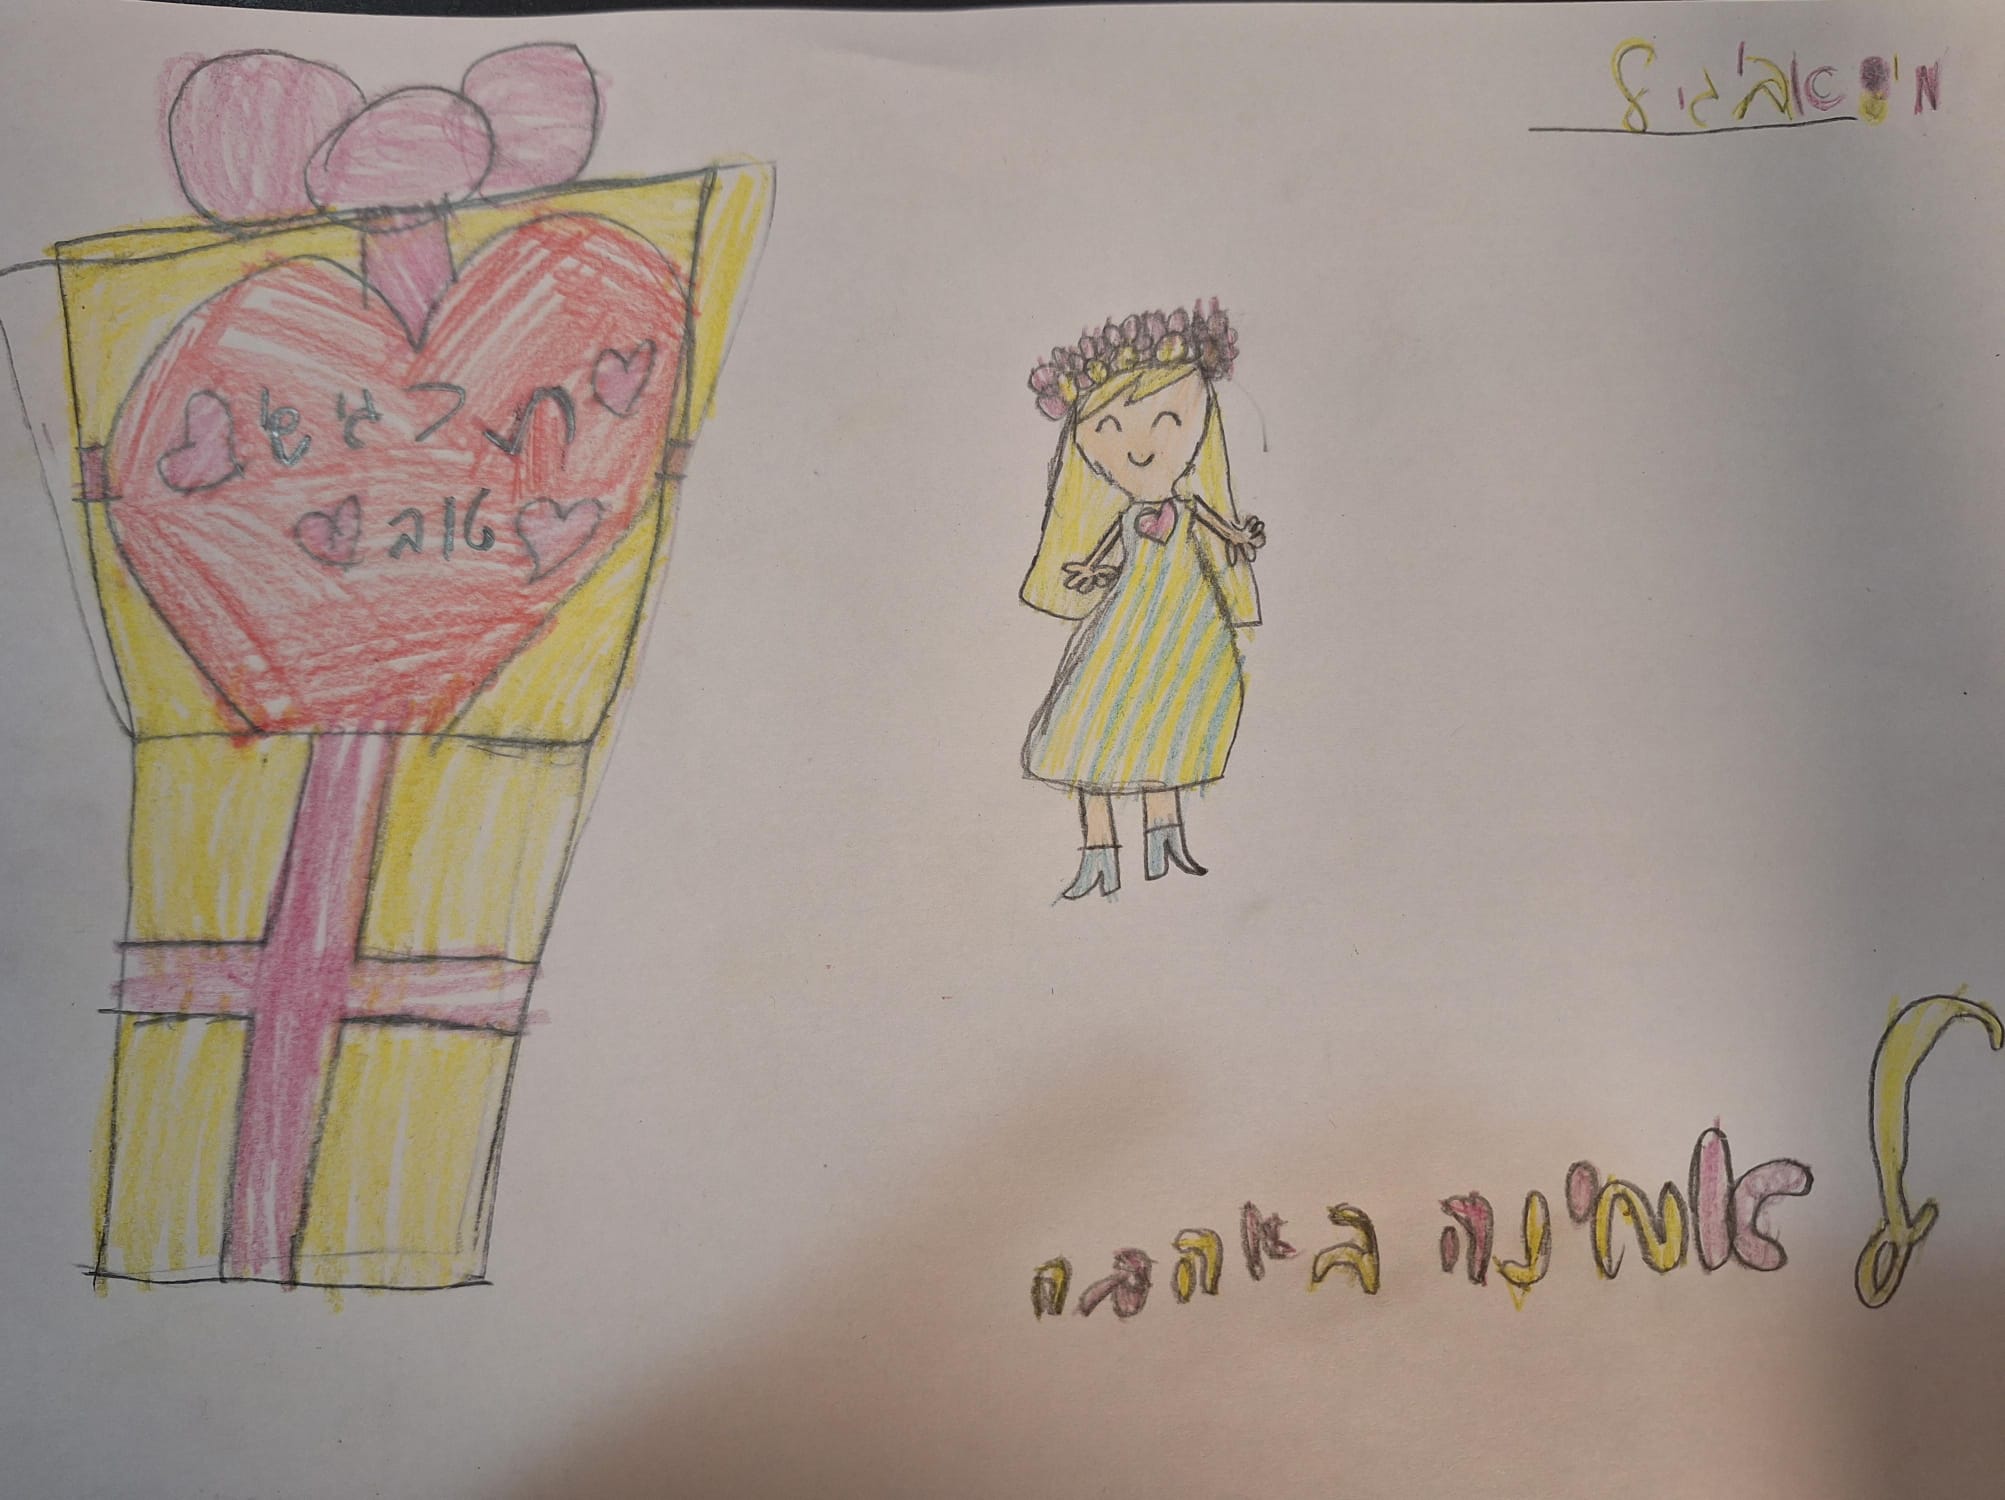 A drawing one of the students gifted to Amina al-Hassouni (Photo: Private album)